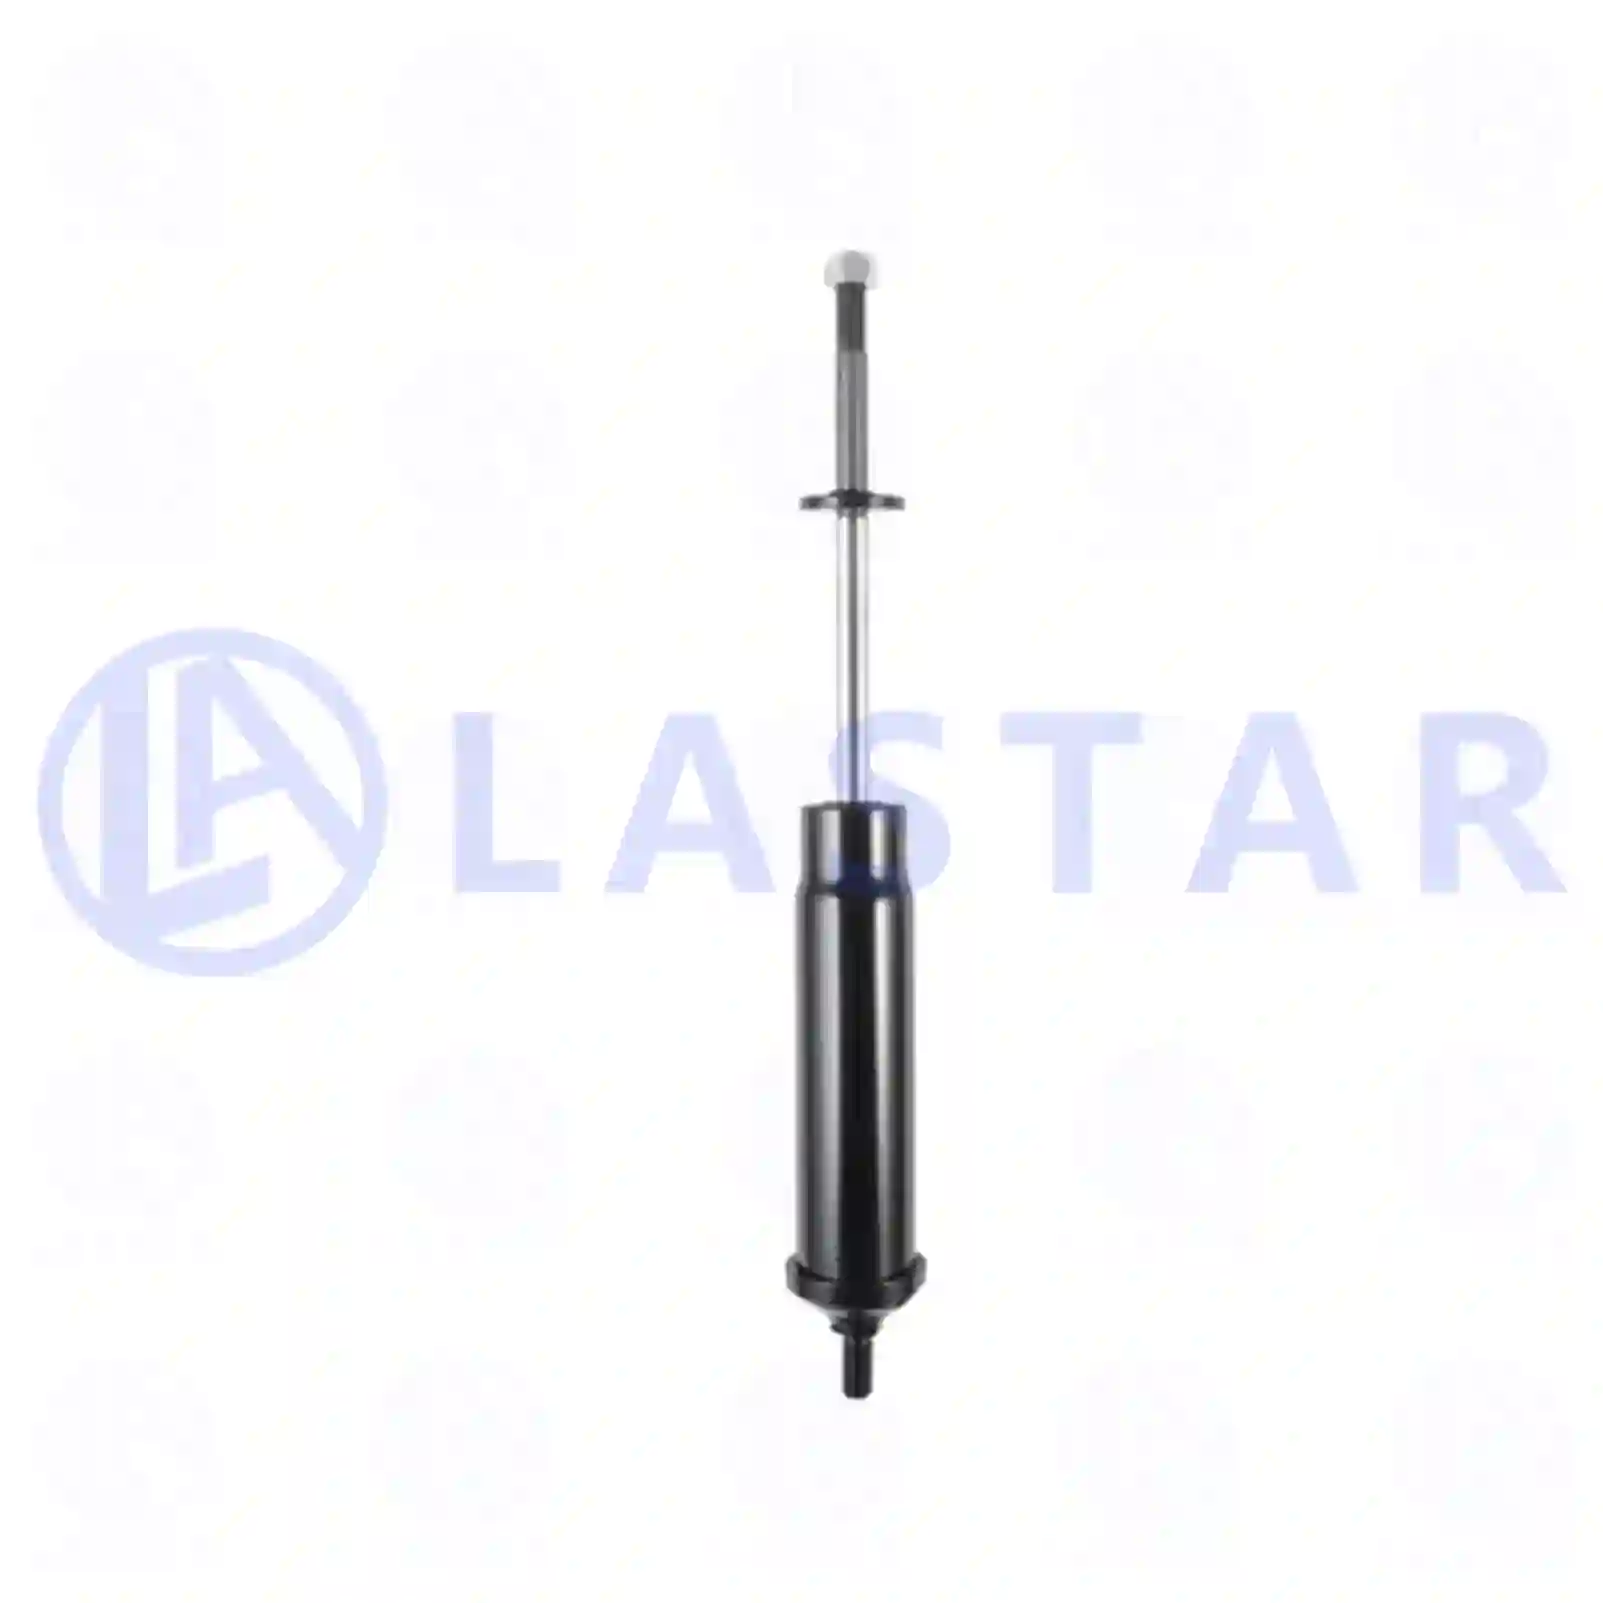 Cabin shock absorber, 77735874, 1363122, 1424228, , , ||  77735874 Lastar Spare Part | Truck Spare Parts, Auotomotive Spare Parts Cabin shock absorber, 77735874, 1363122, 1424228, , , ||  77735874 Lastar Spare Part | Truck Spare Parts, Auotomotive Spare Parts